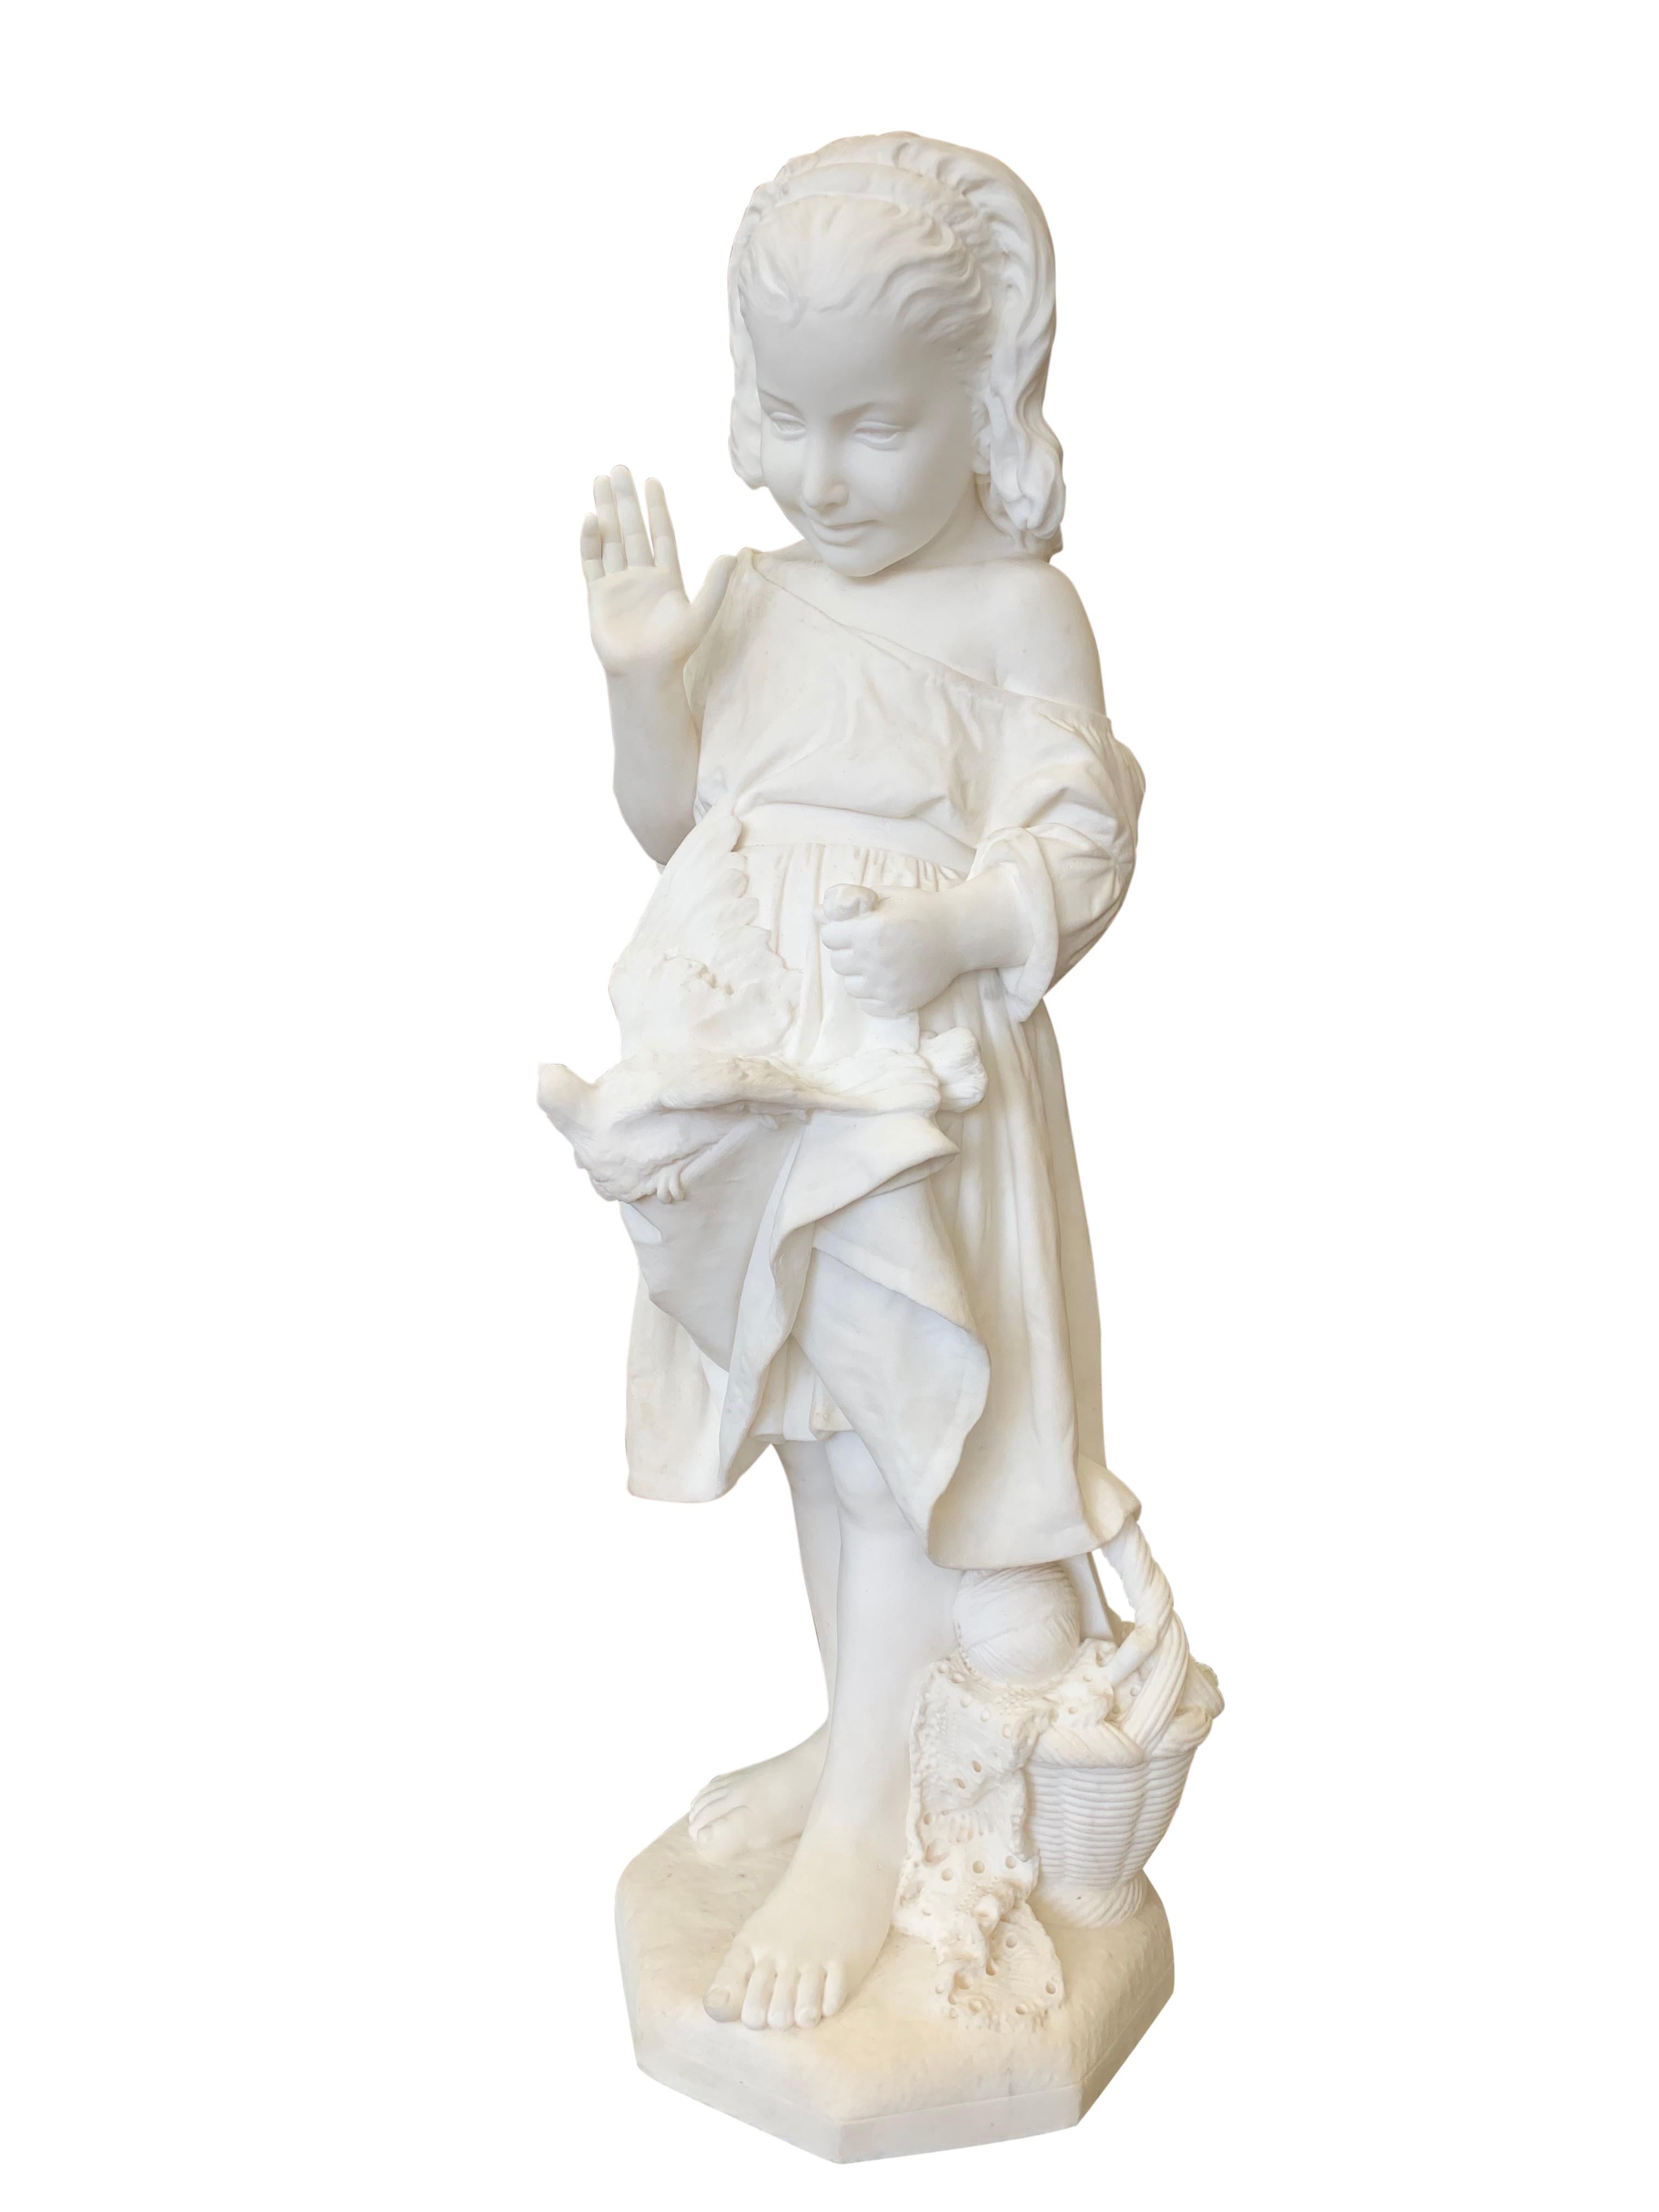 A lovely 19th century carved Carrara marble figure of a young girl waving  her right hand as a dove rests on her dress, she is standing aside a basket with a ball of string and a garment, by Emanuele Caroni.

Signed: E. Caroni, Firenze 
Dated